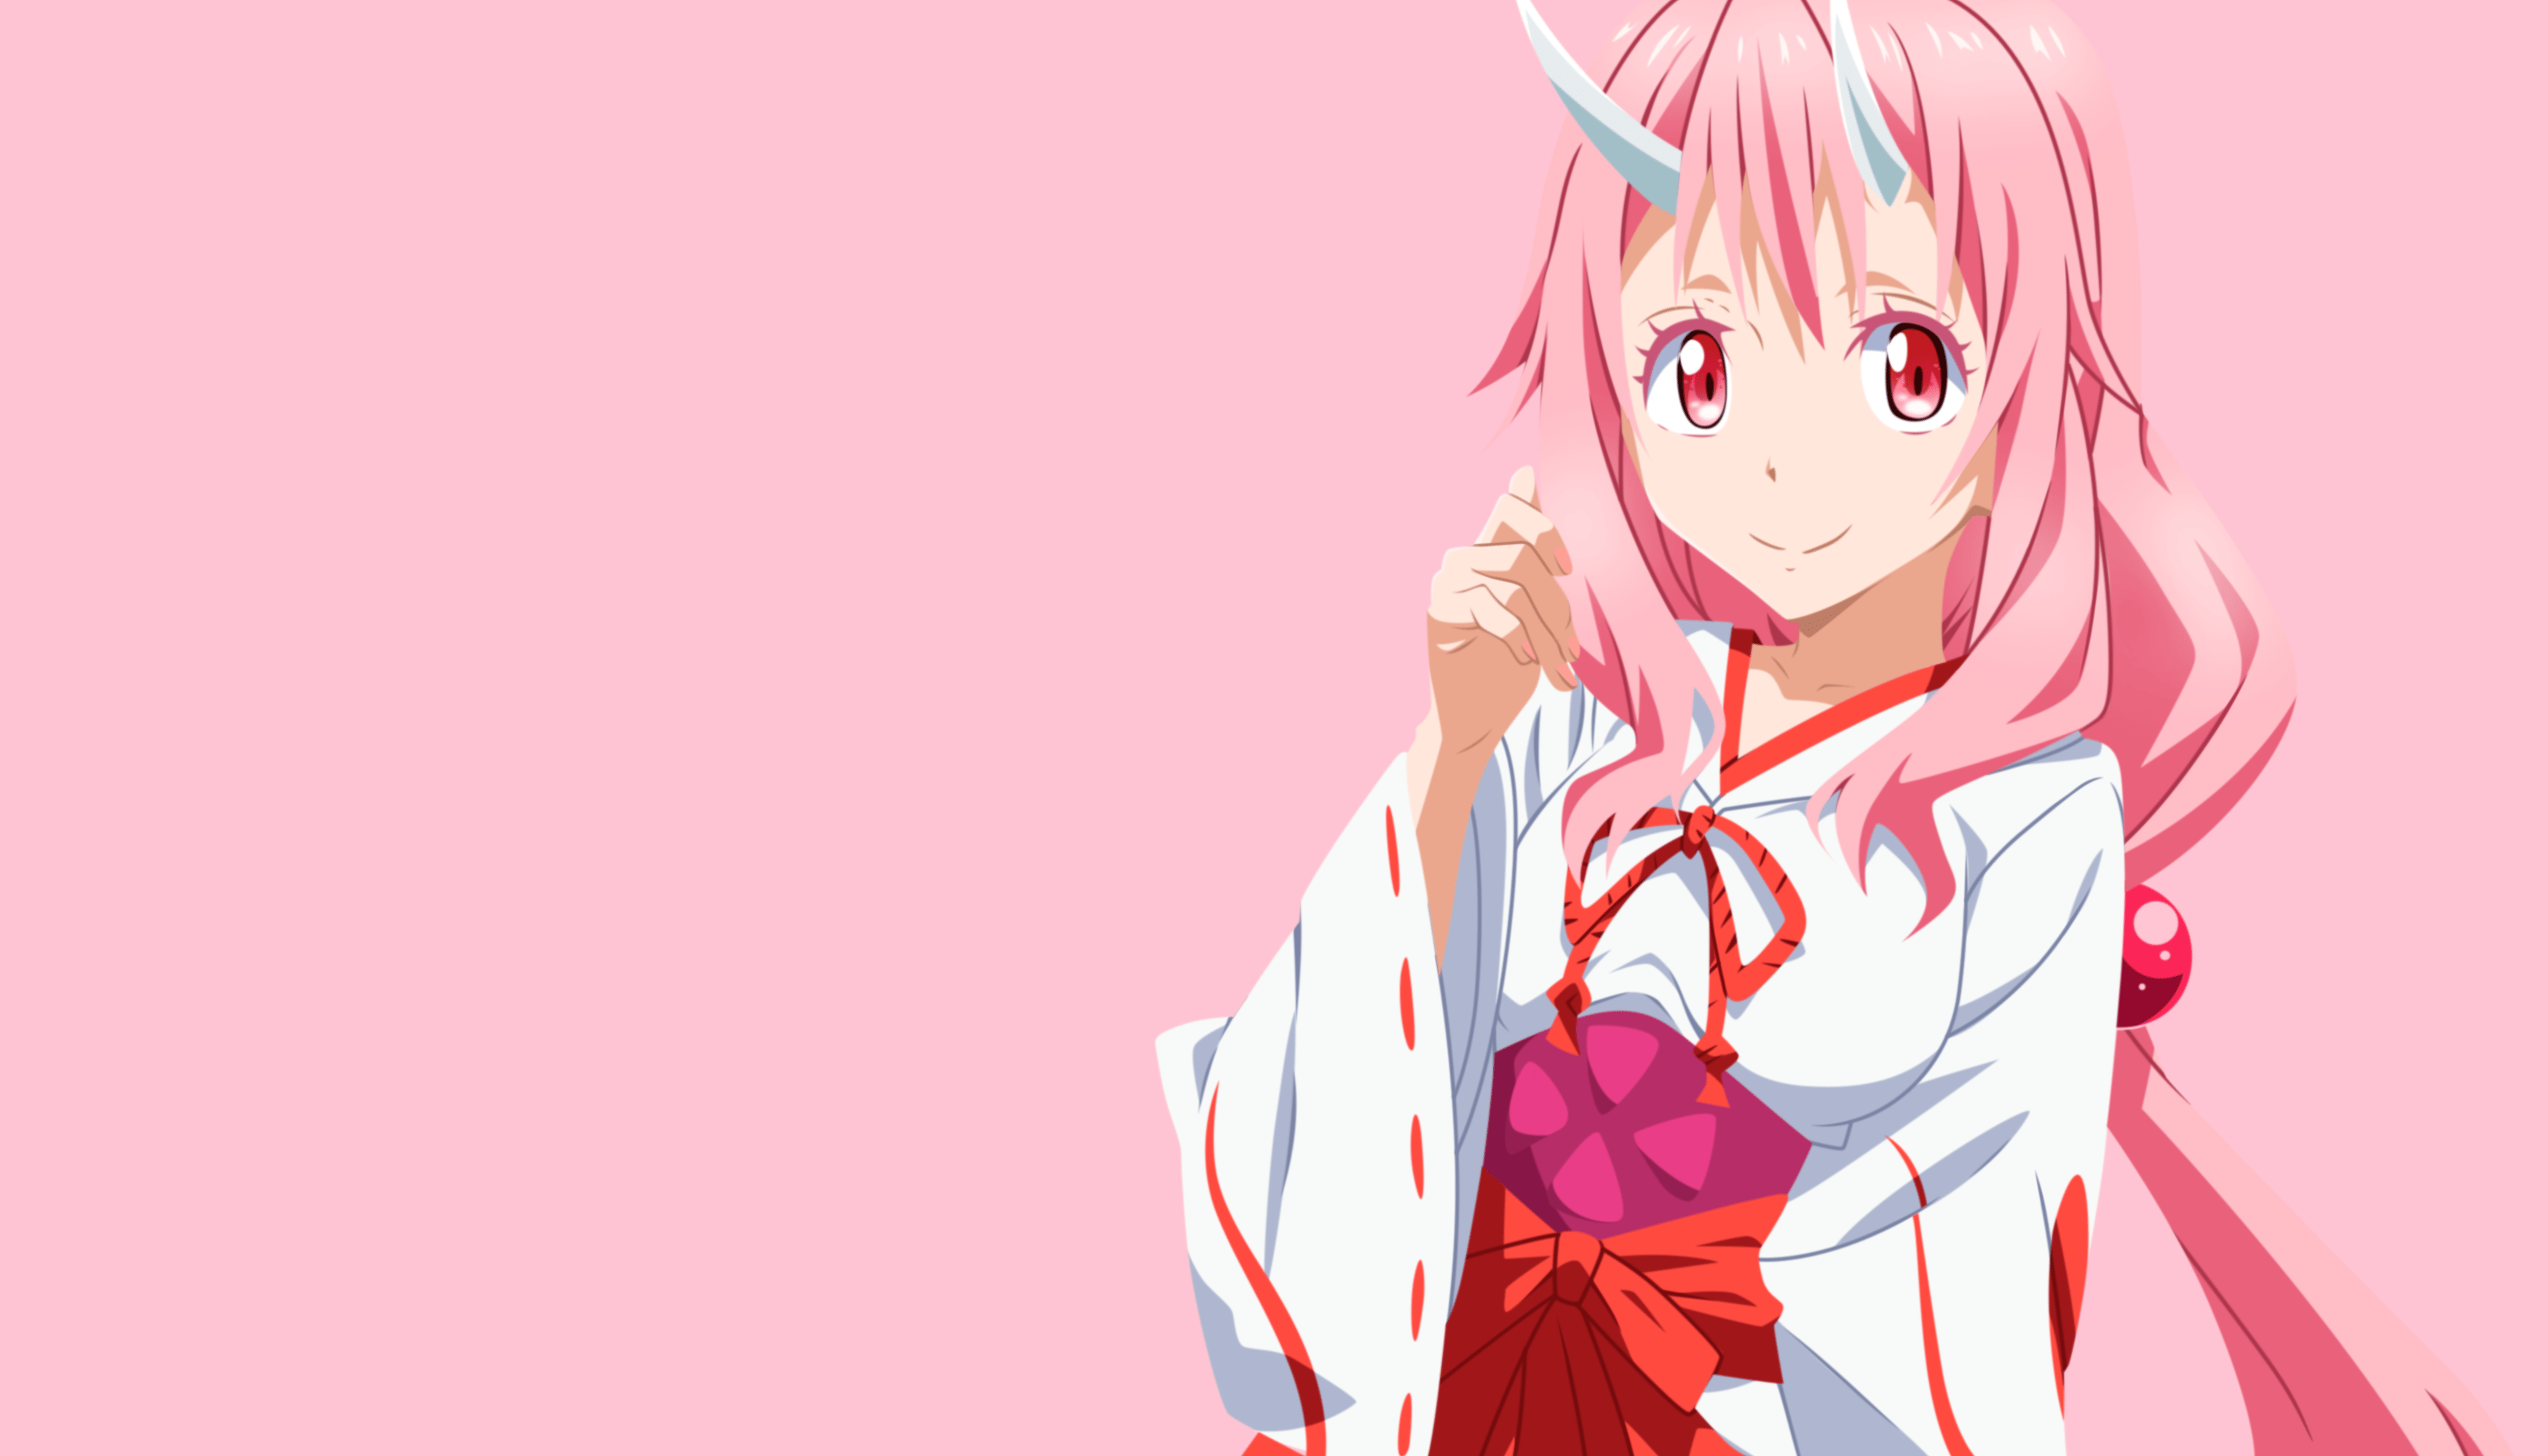 That Time I Got Reincarnated As A Slime HD, Shuna (That Time I Got Reincarnated as a Slime), Minimalist Gallery HD Wallpaper